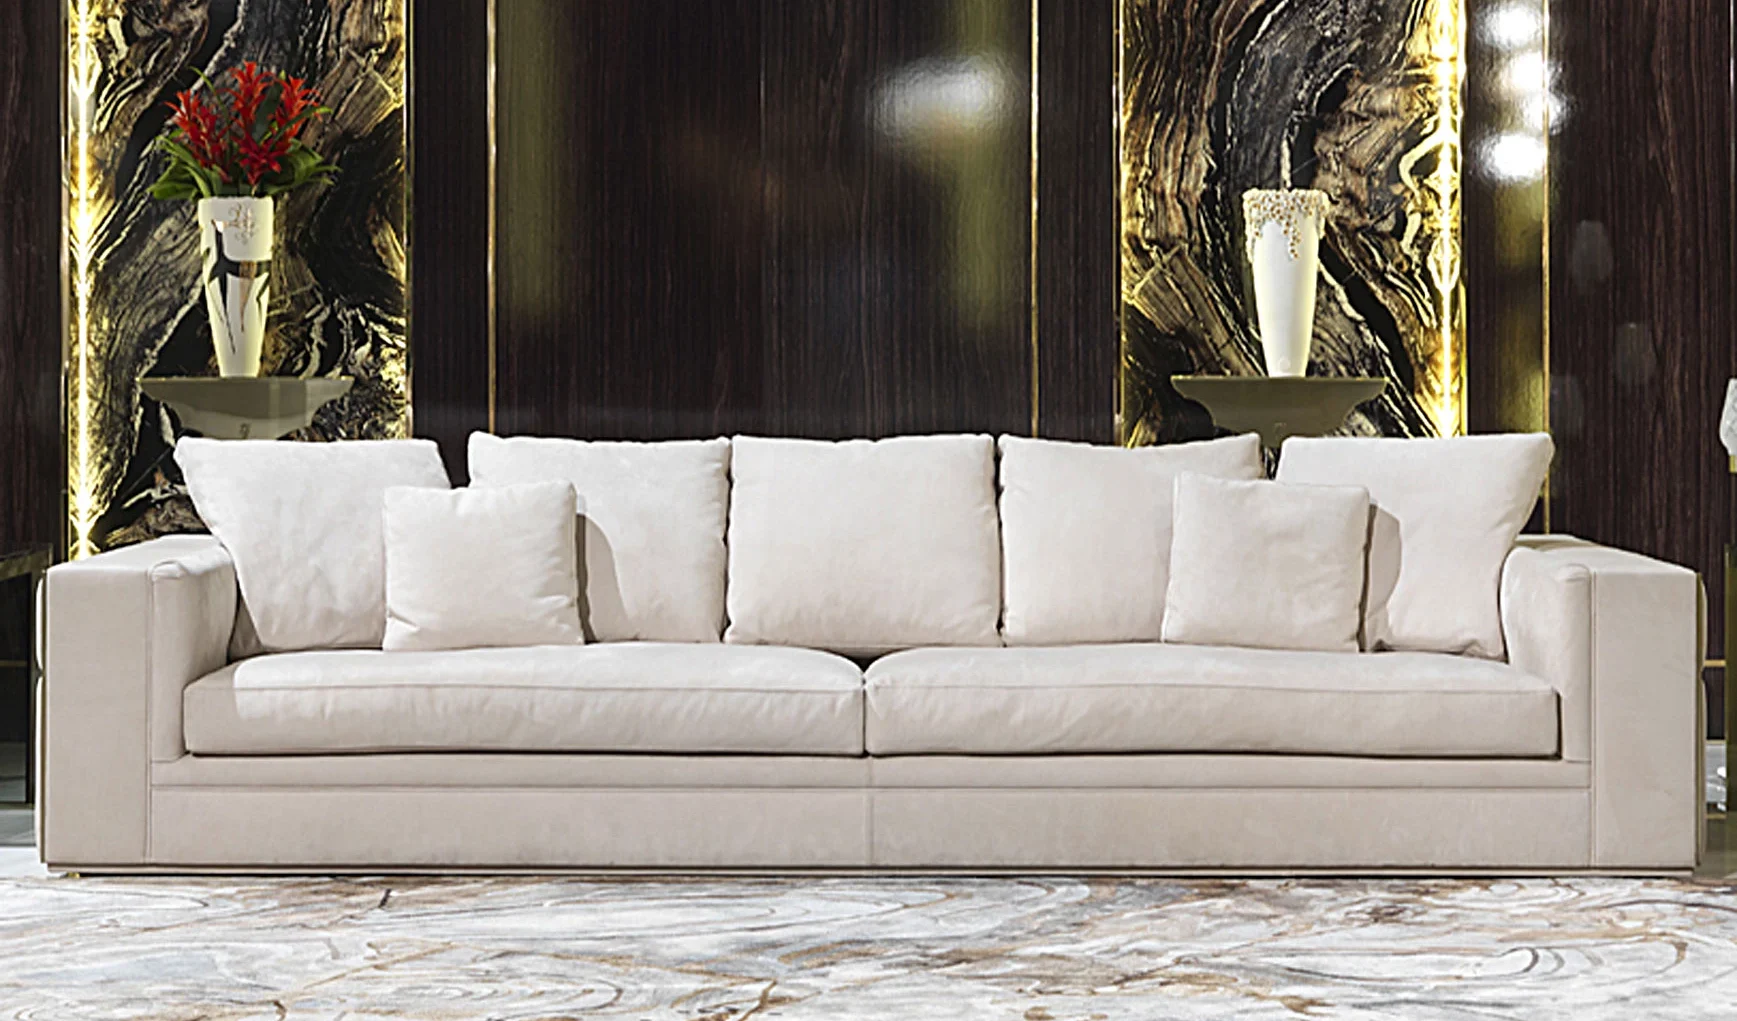 Quality Without the Upfront Cost - high-end sofa - pay per week